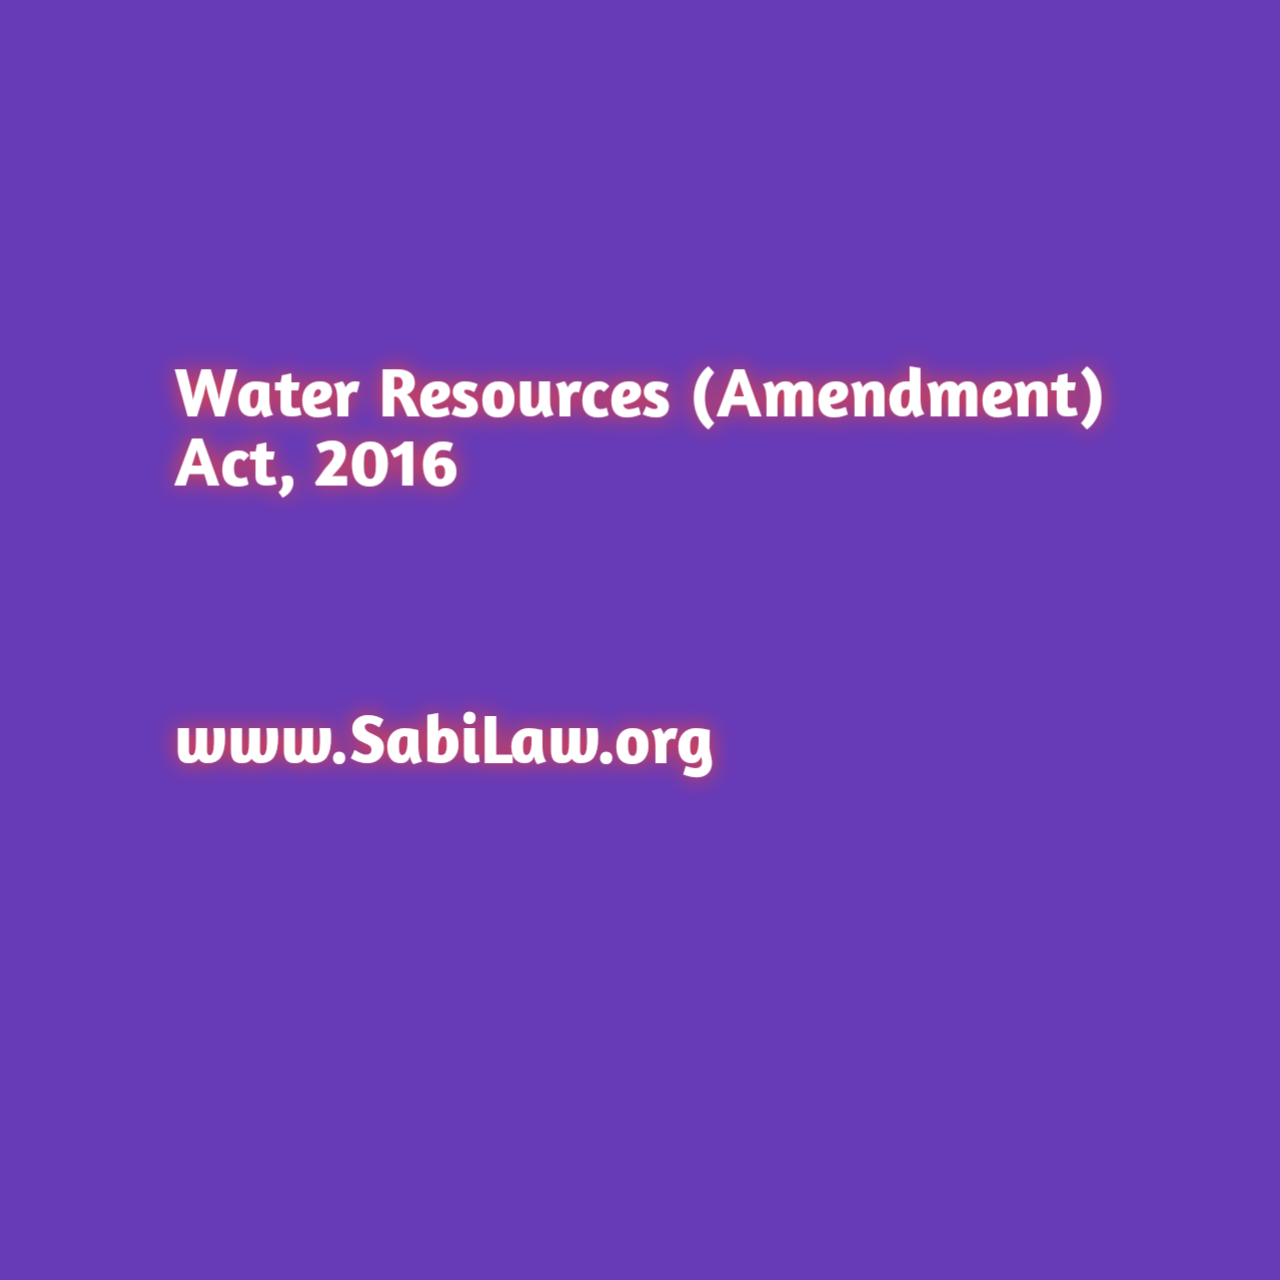 Water Resources(Amendment) Act, 2016